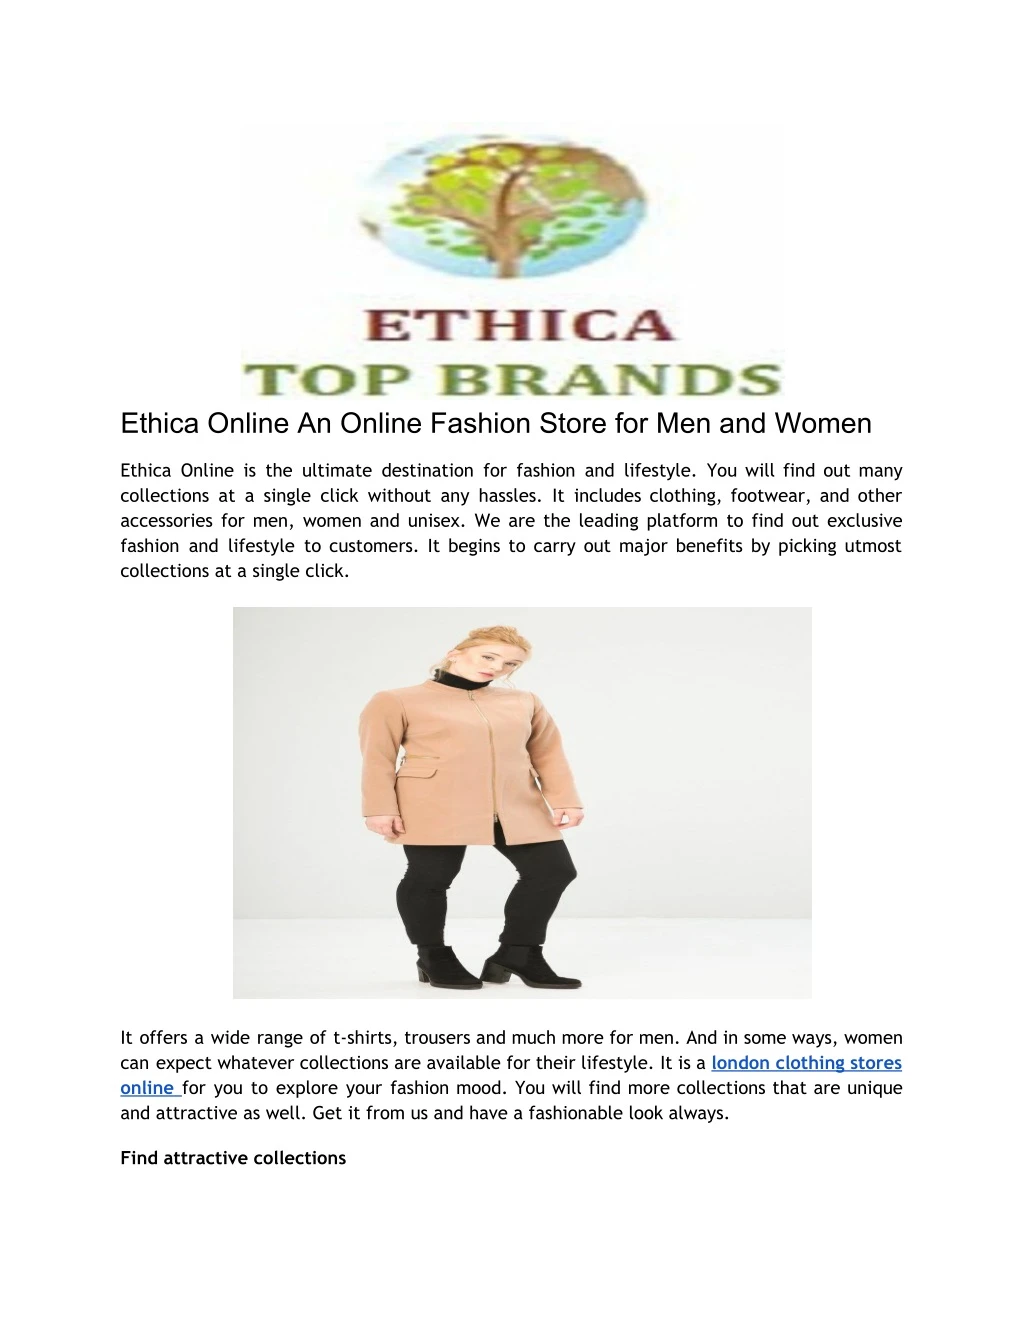 ethica online an online fashion store